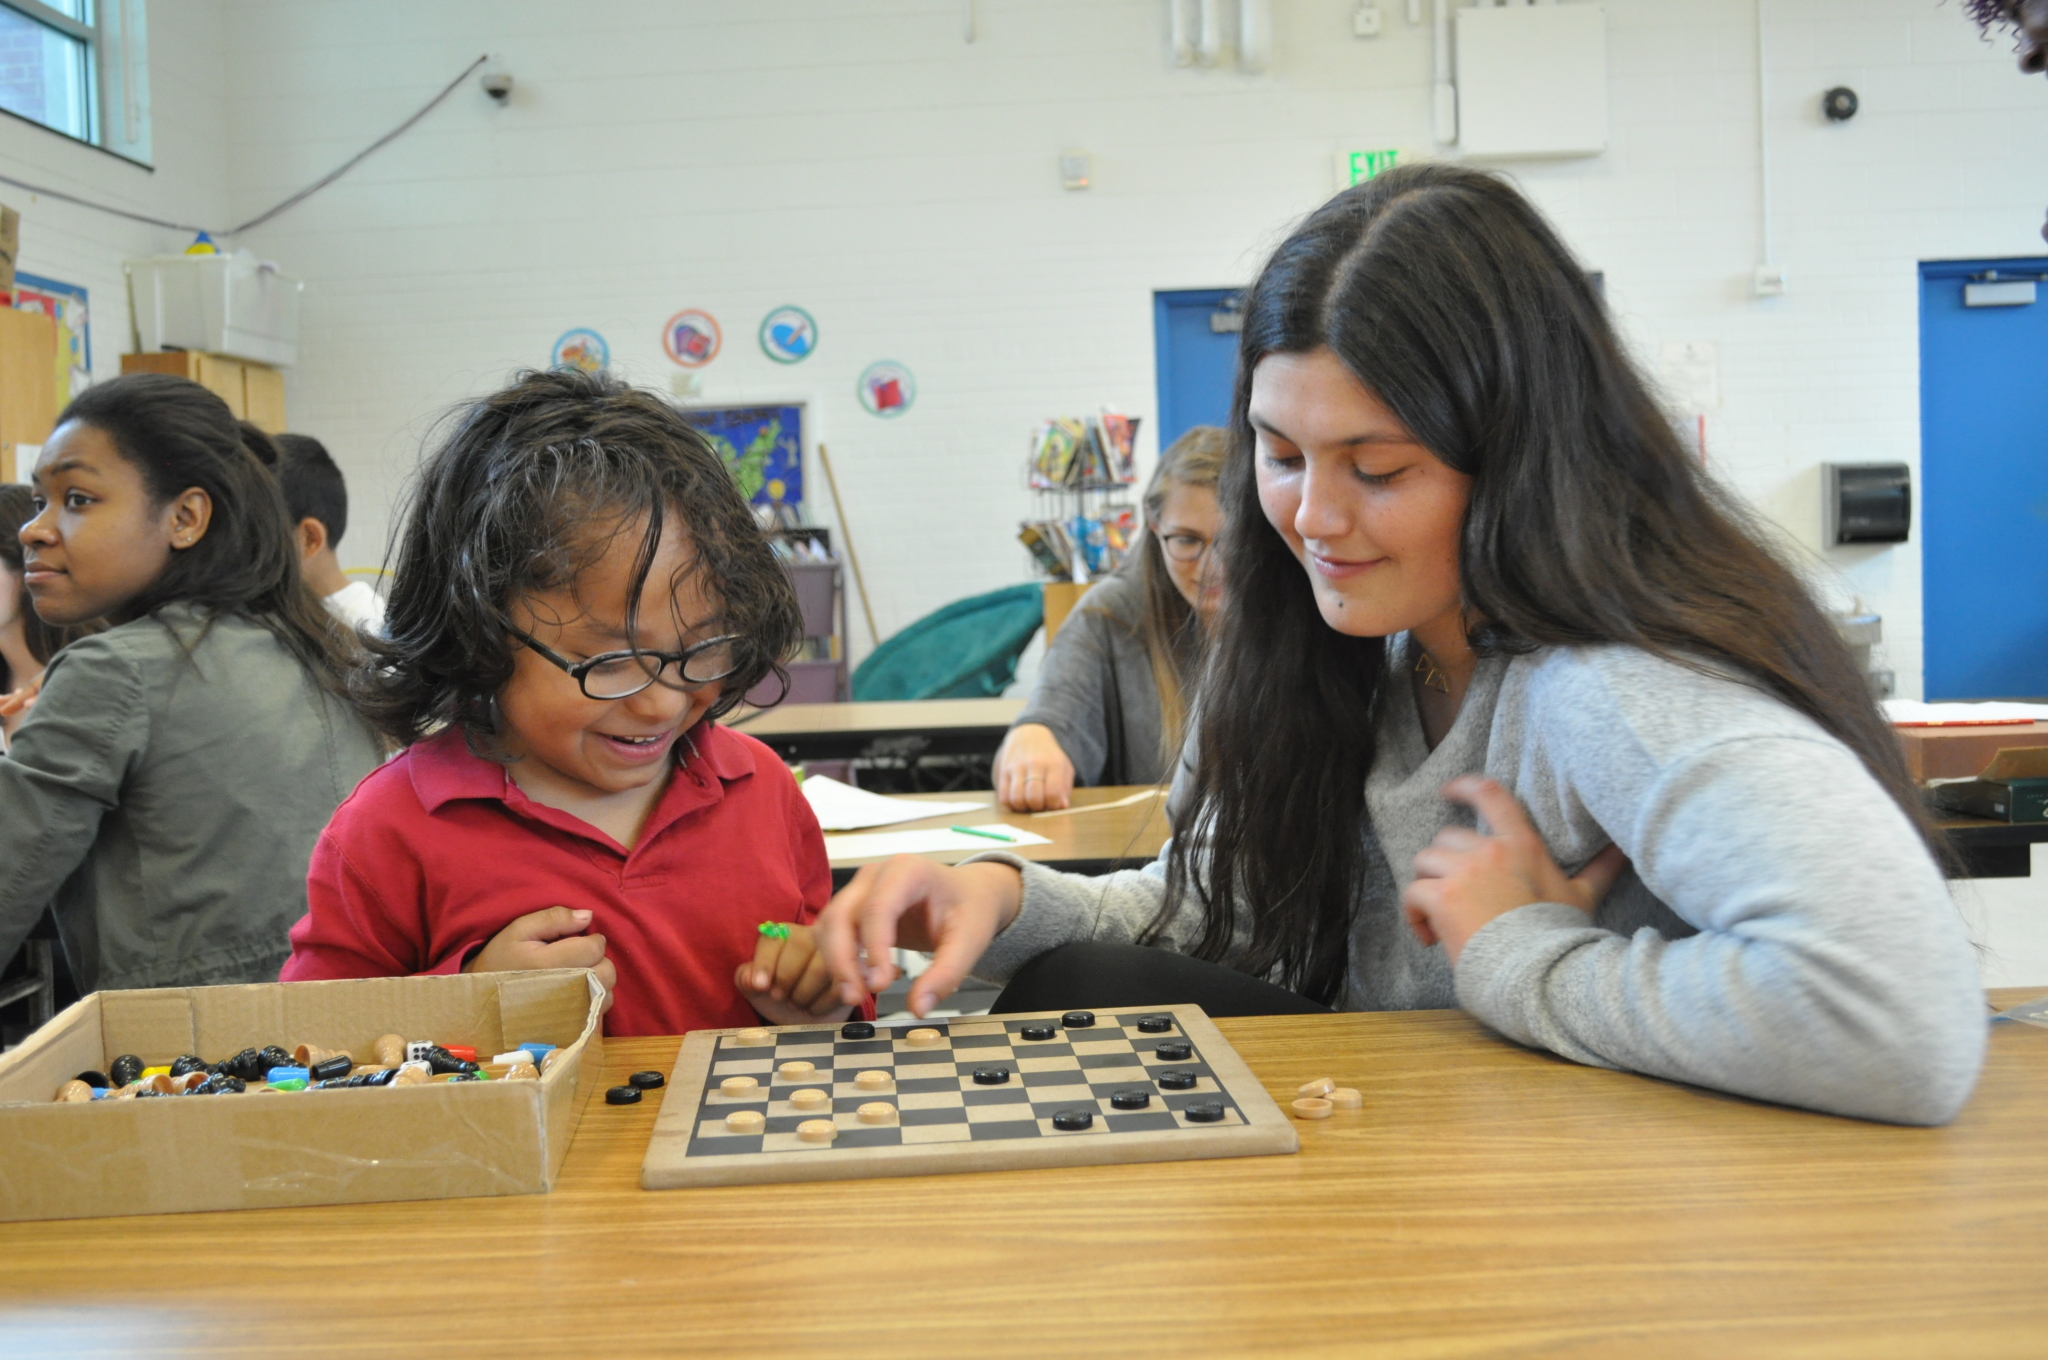 A Duke student tutoring a child while playing checkers